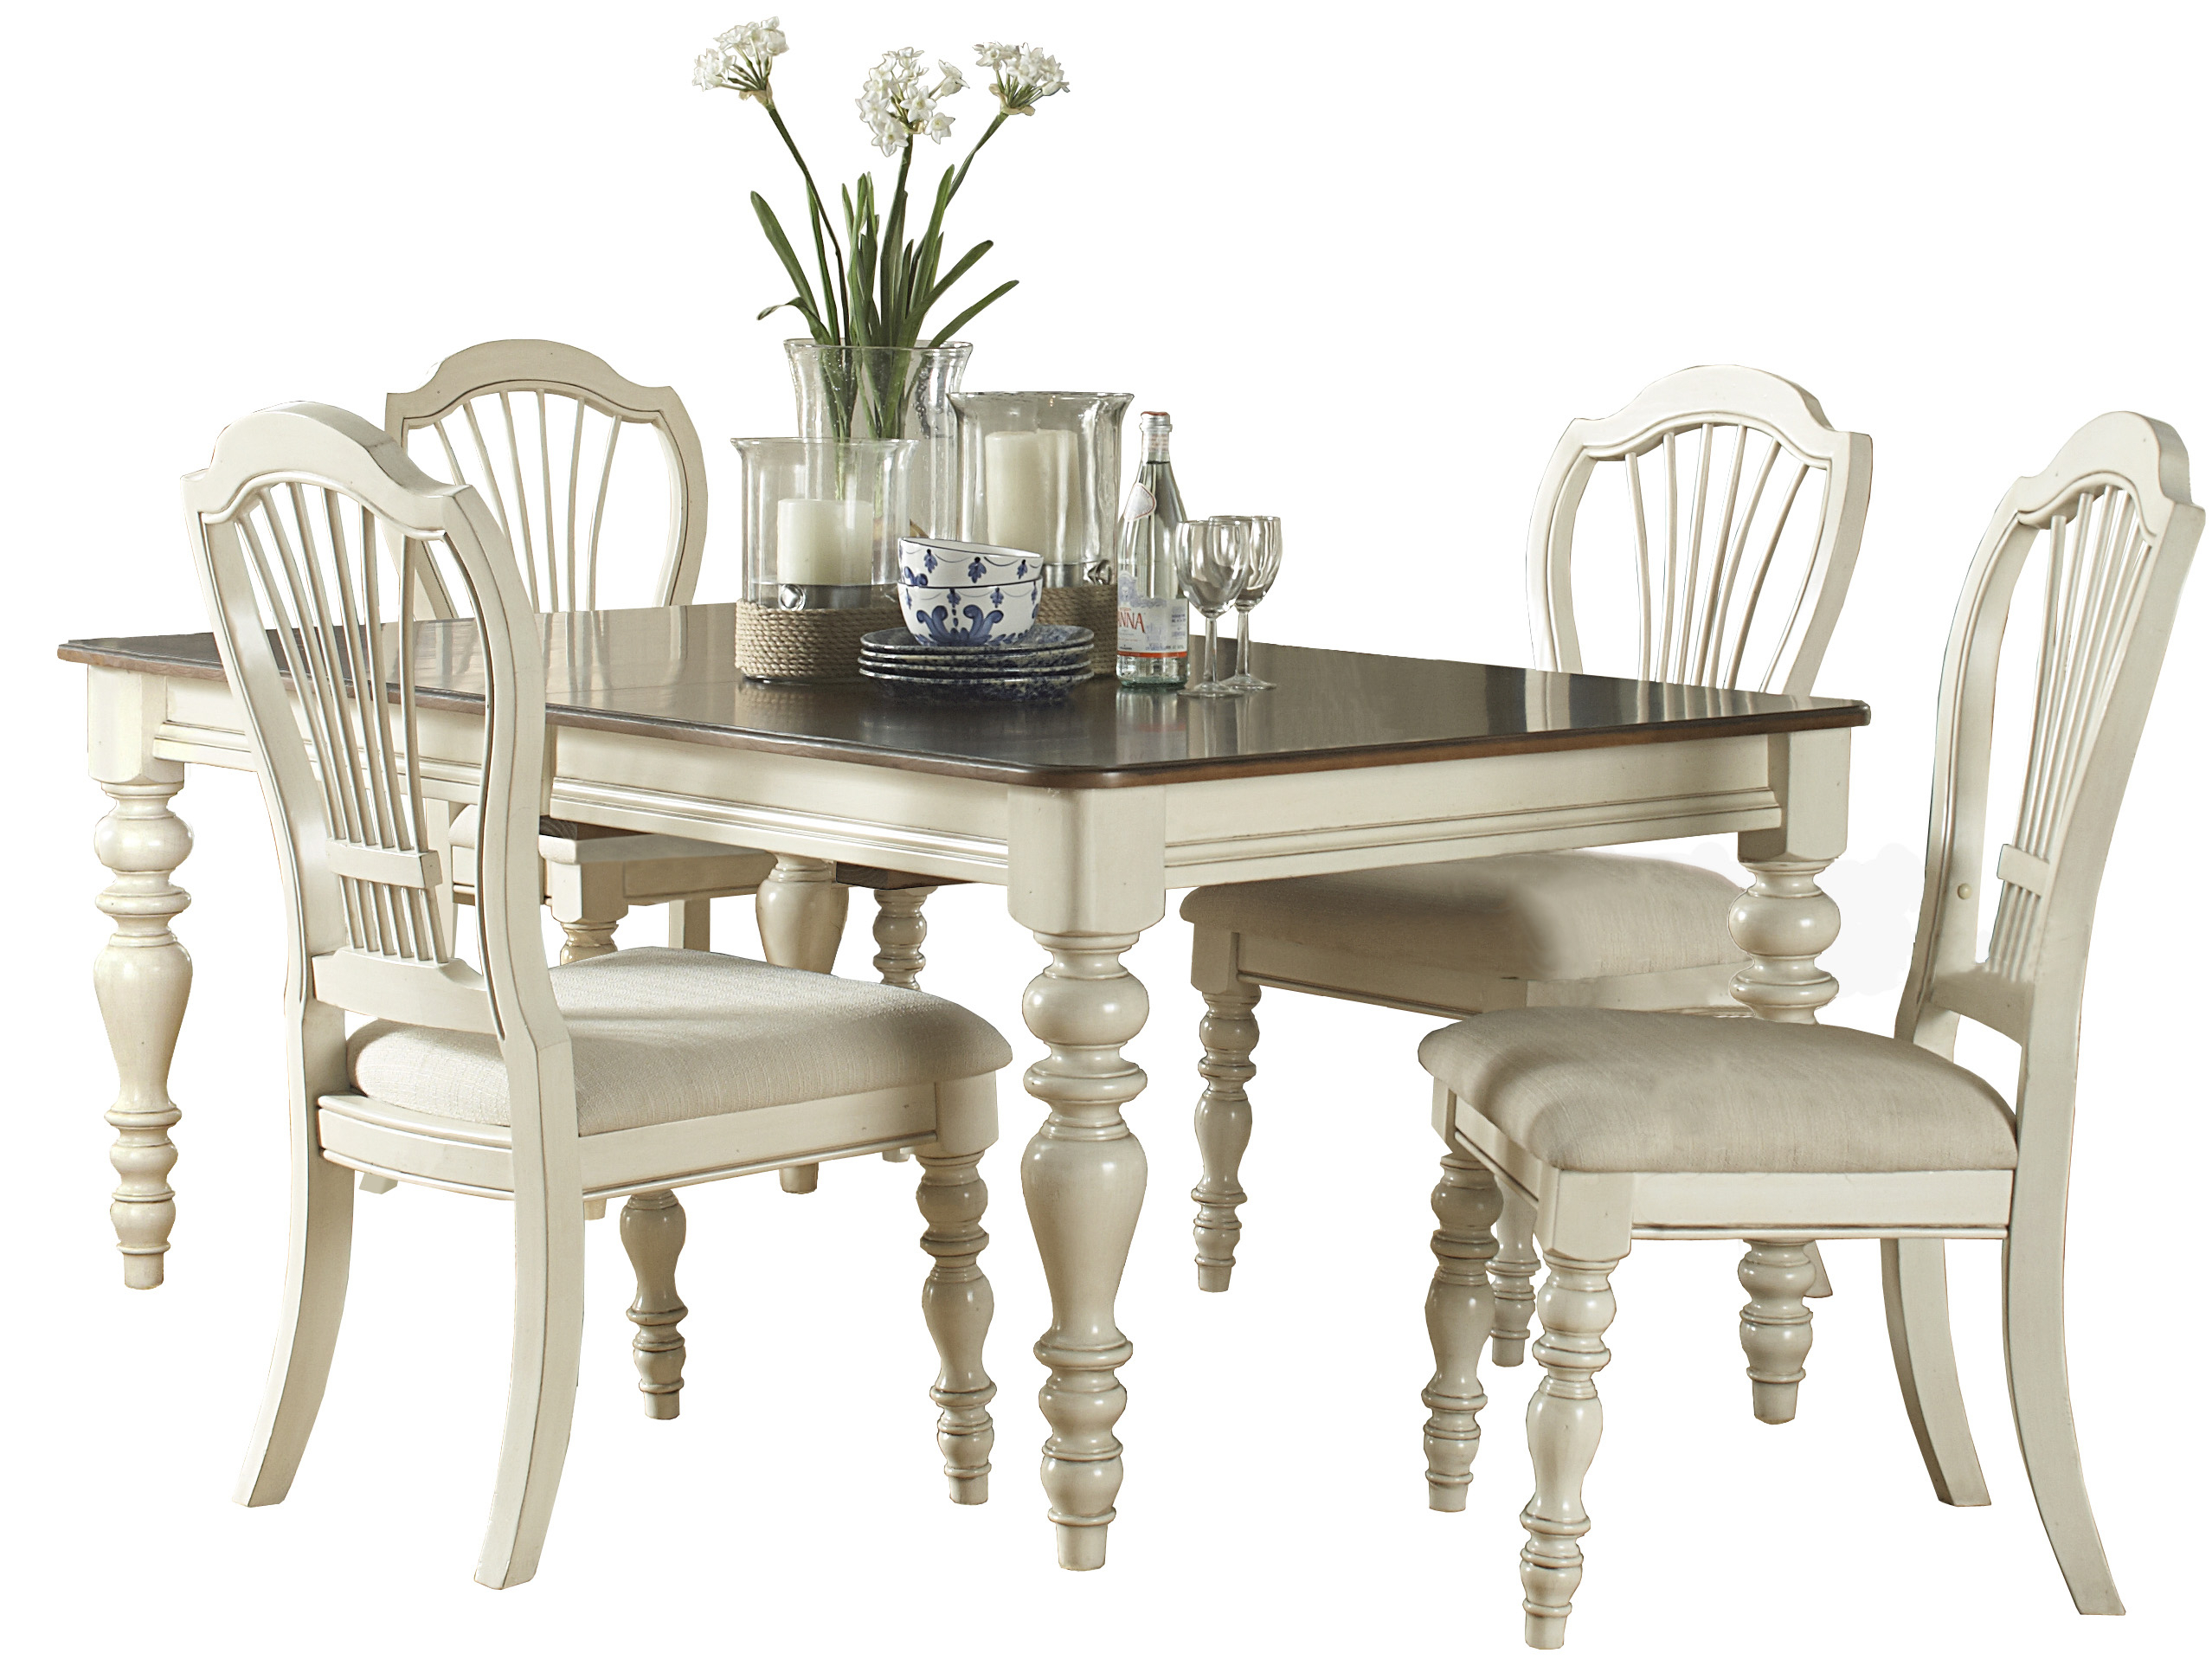 Dining Room French Country Arm Chair Ideas On Foter